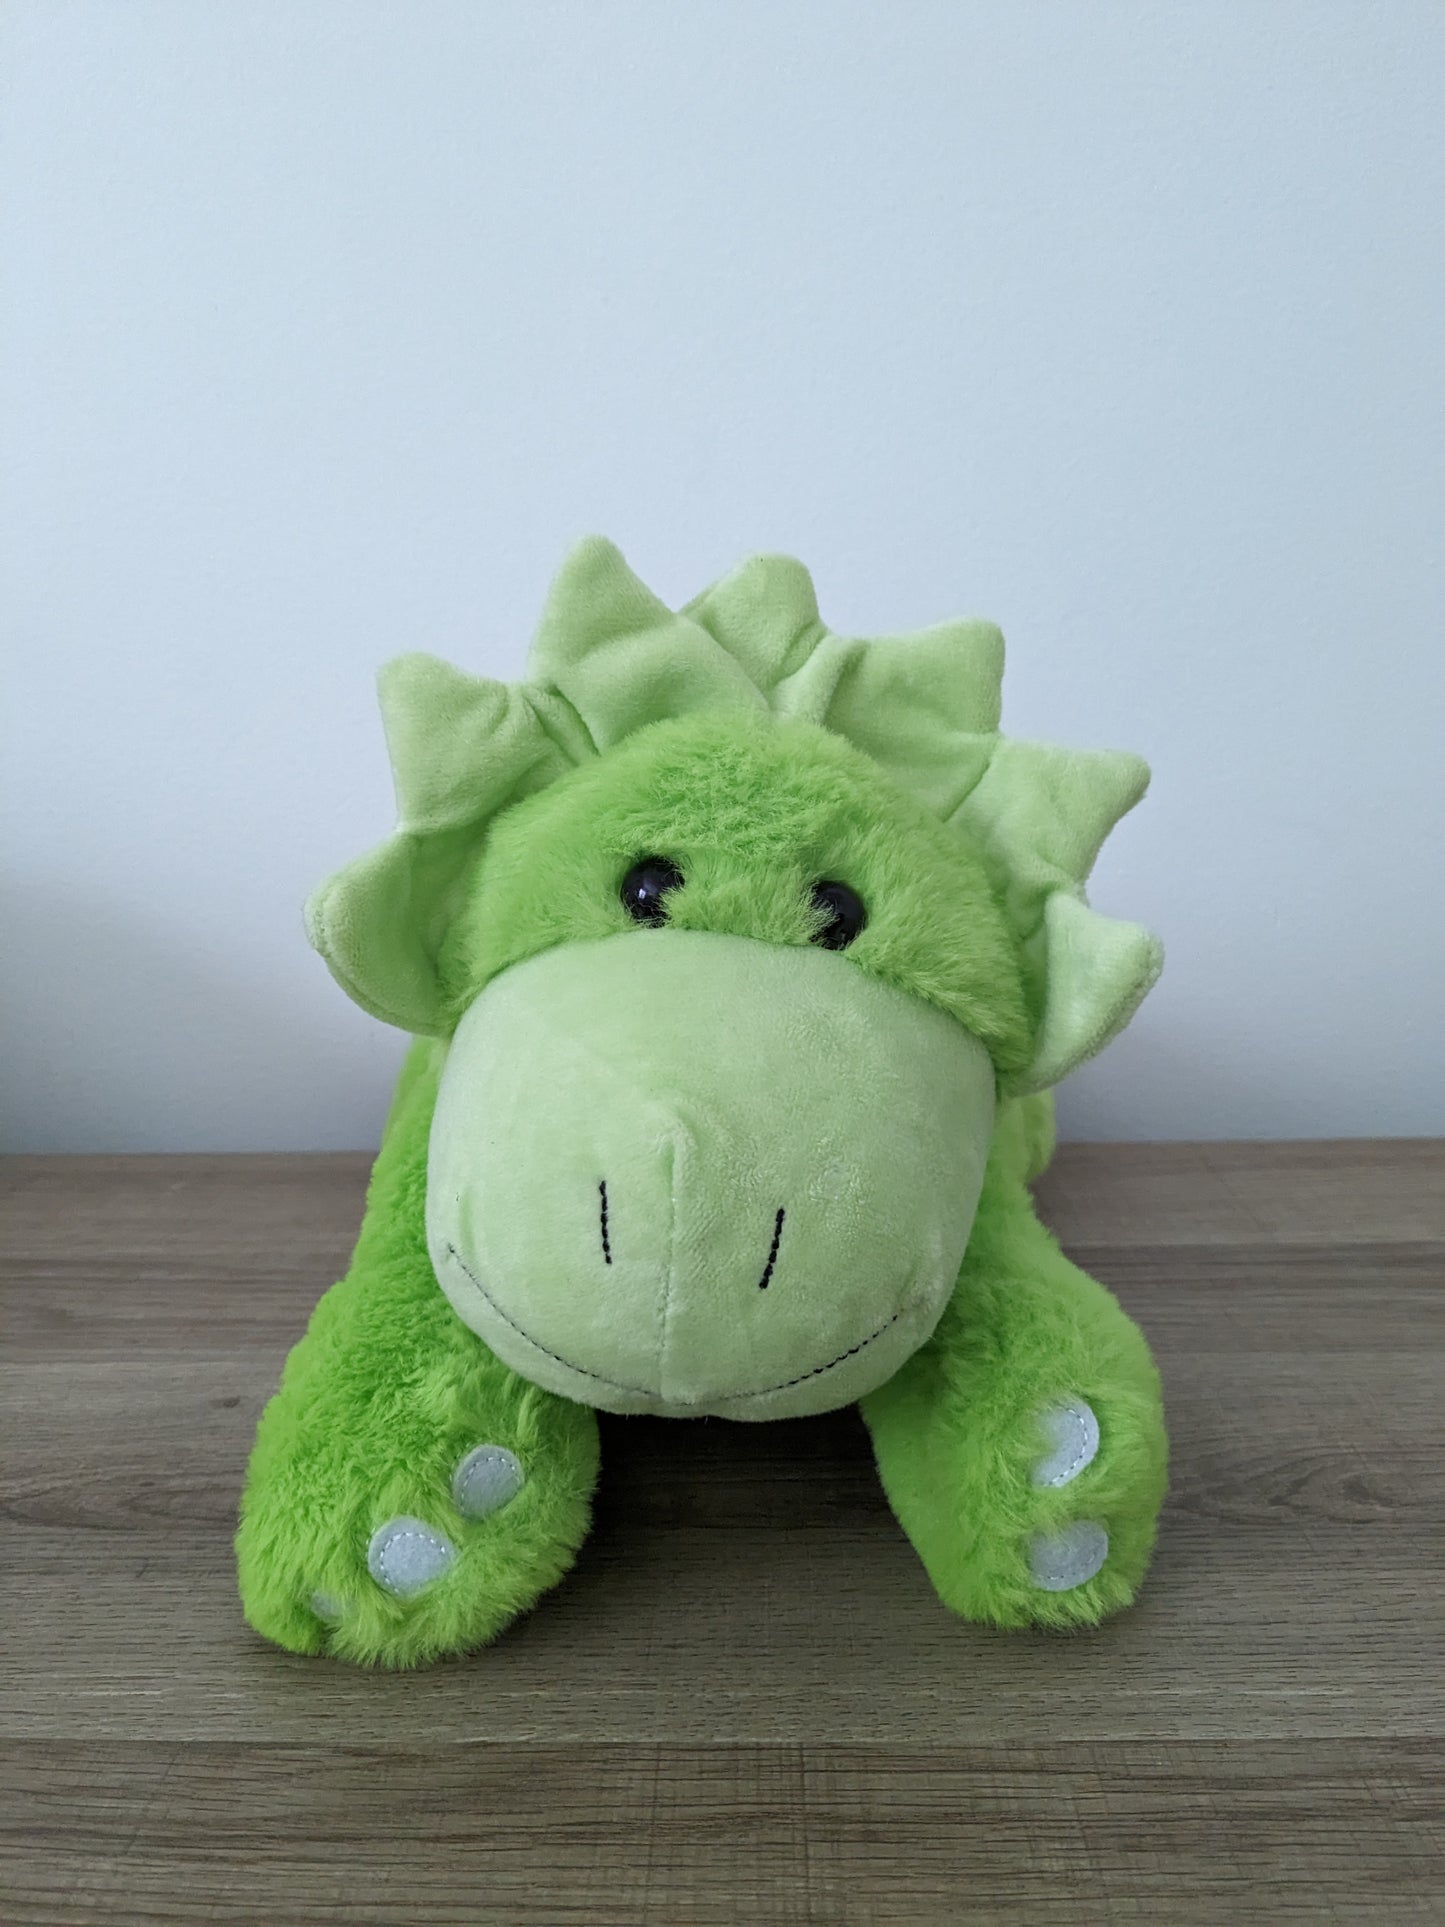 Plush dino that sings and lights up